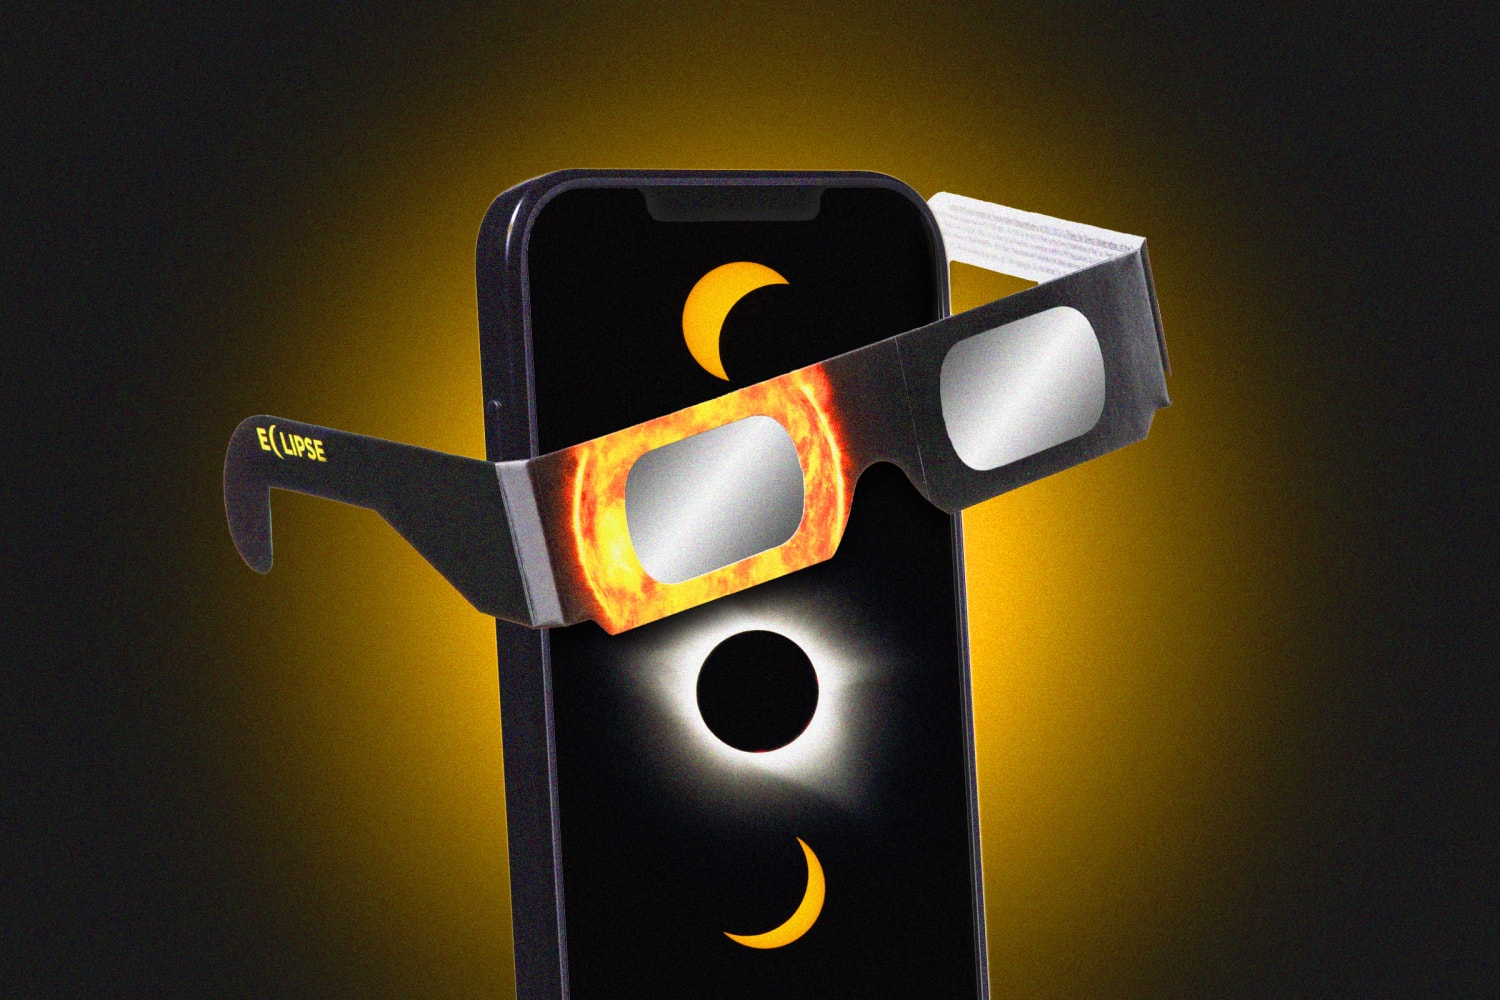 The best way to capture a total solar eclipse with your phone